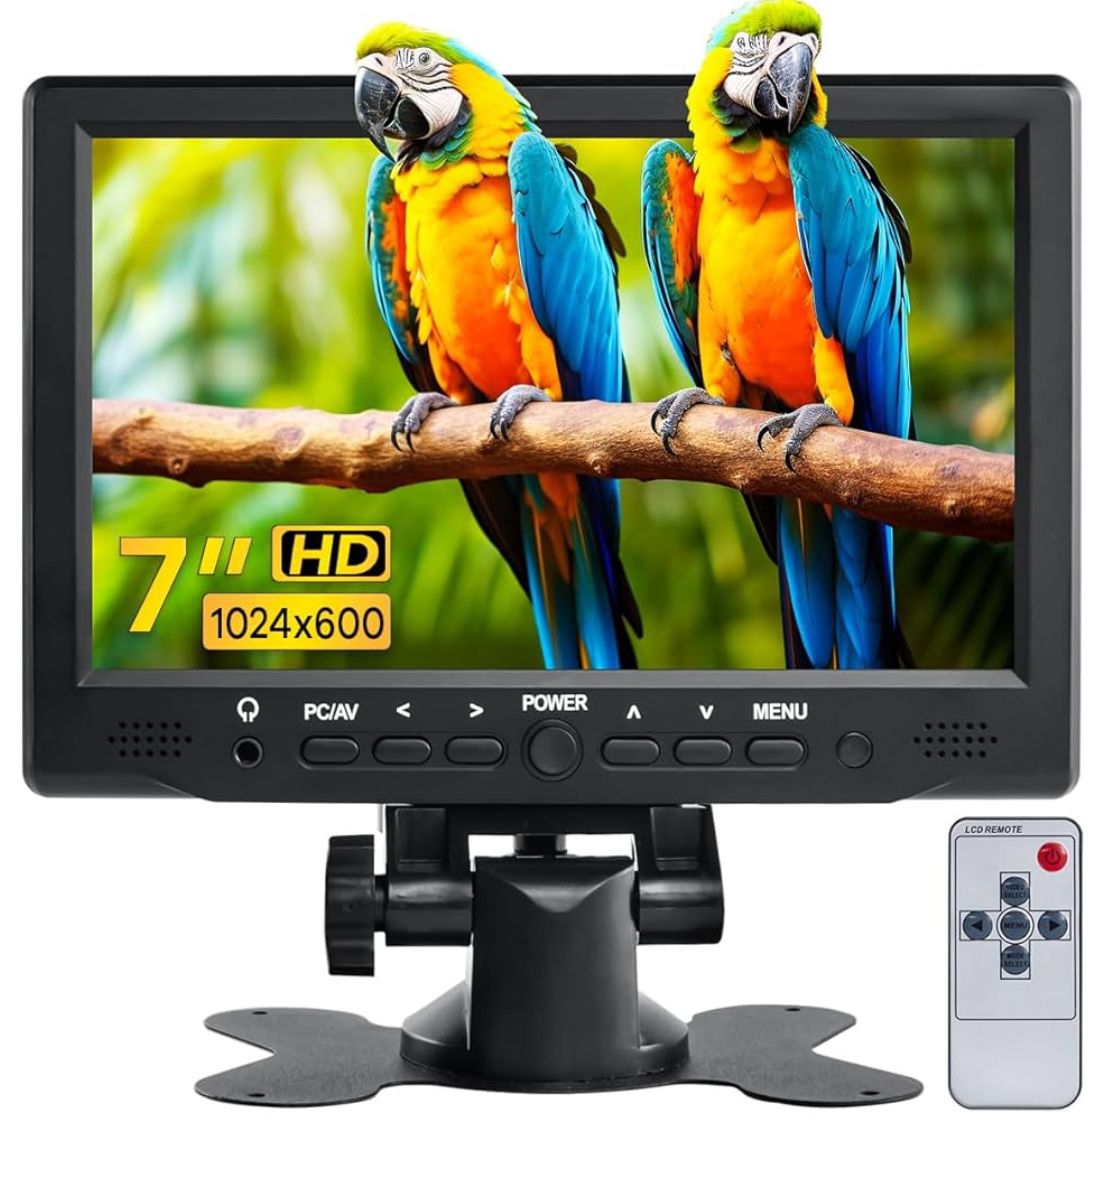 7 inch Small Monitor TFT LCD Display 1024X600 HDMI Mini Portable Screen for PC/TV/Camera/Gaming/Raspberry PI 50+ bought in past month